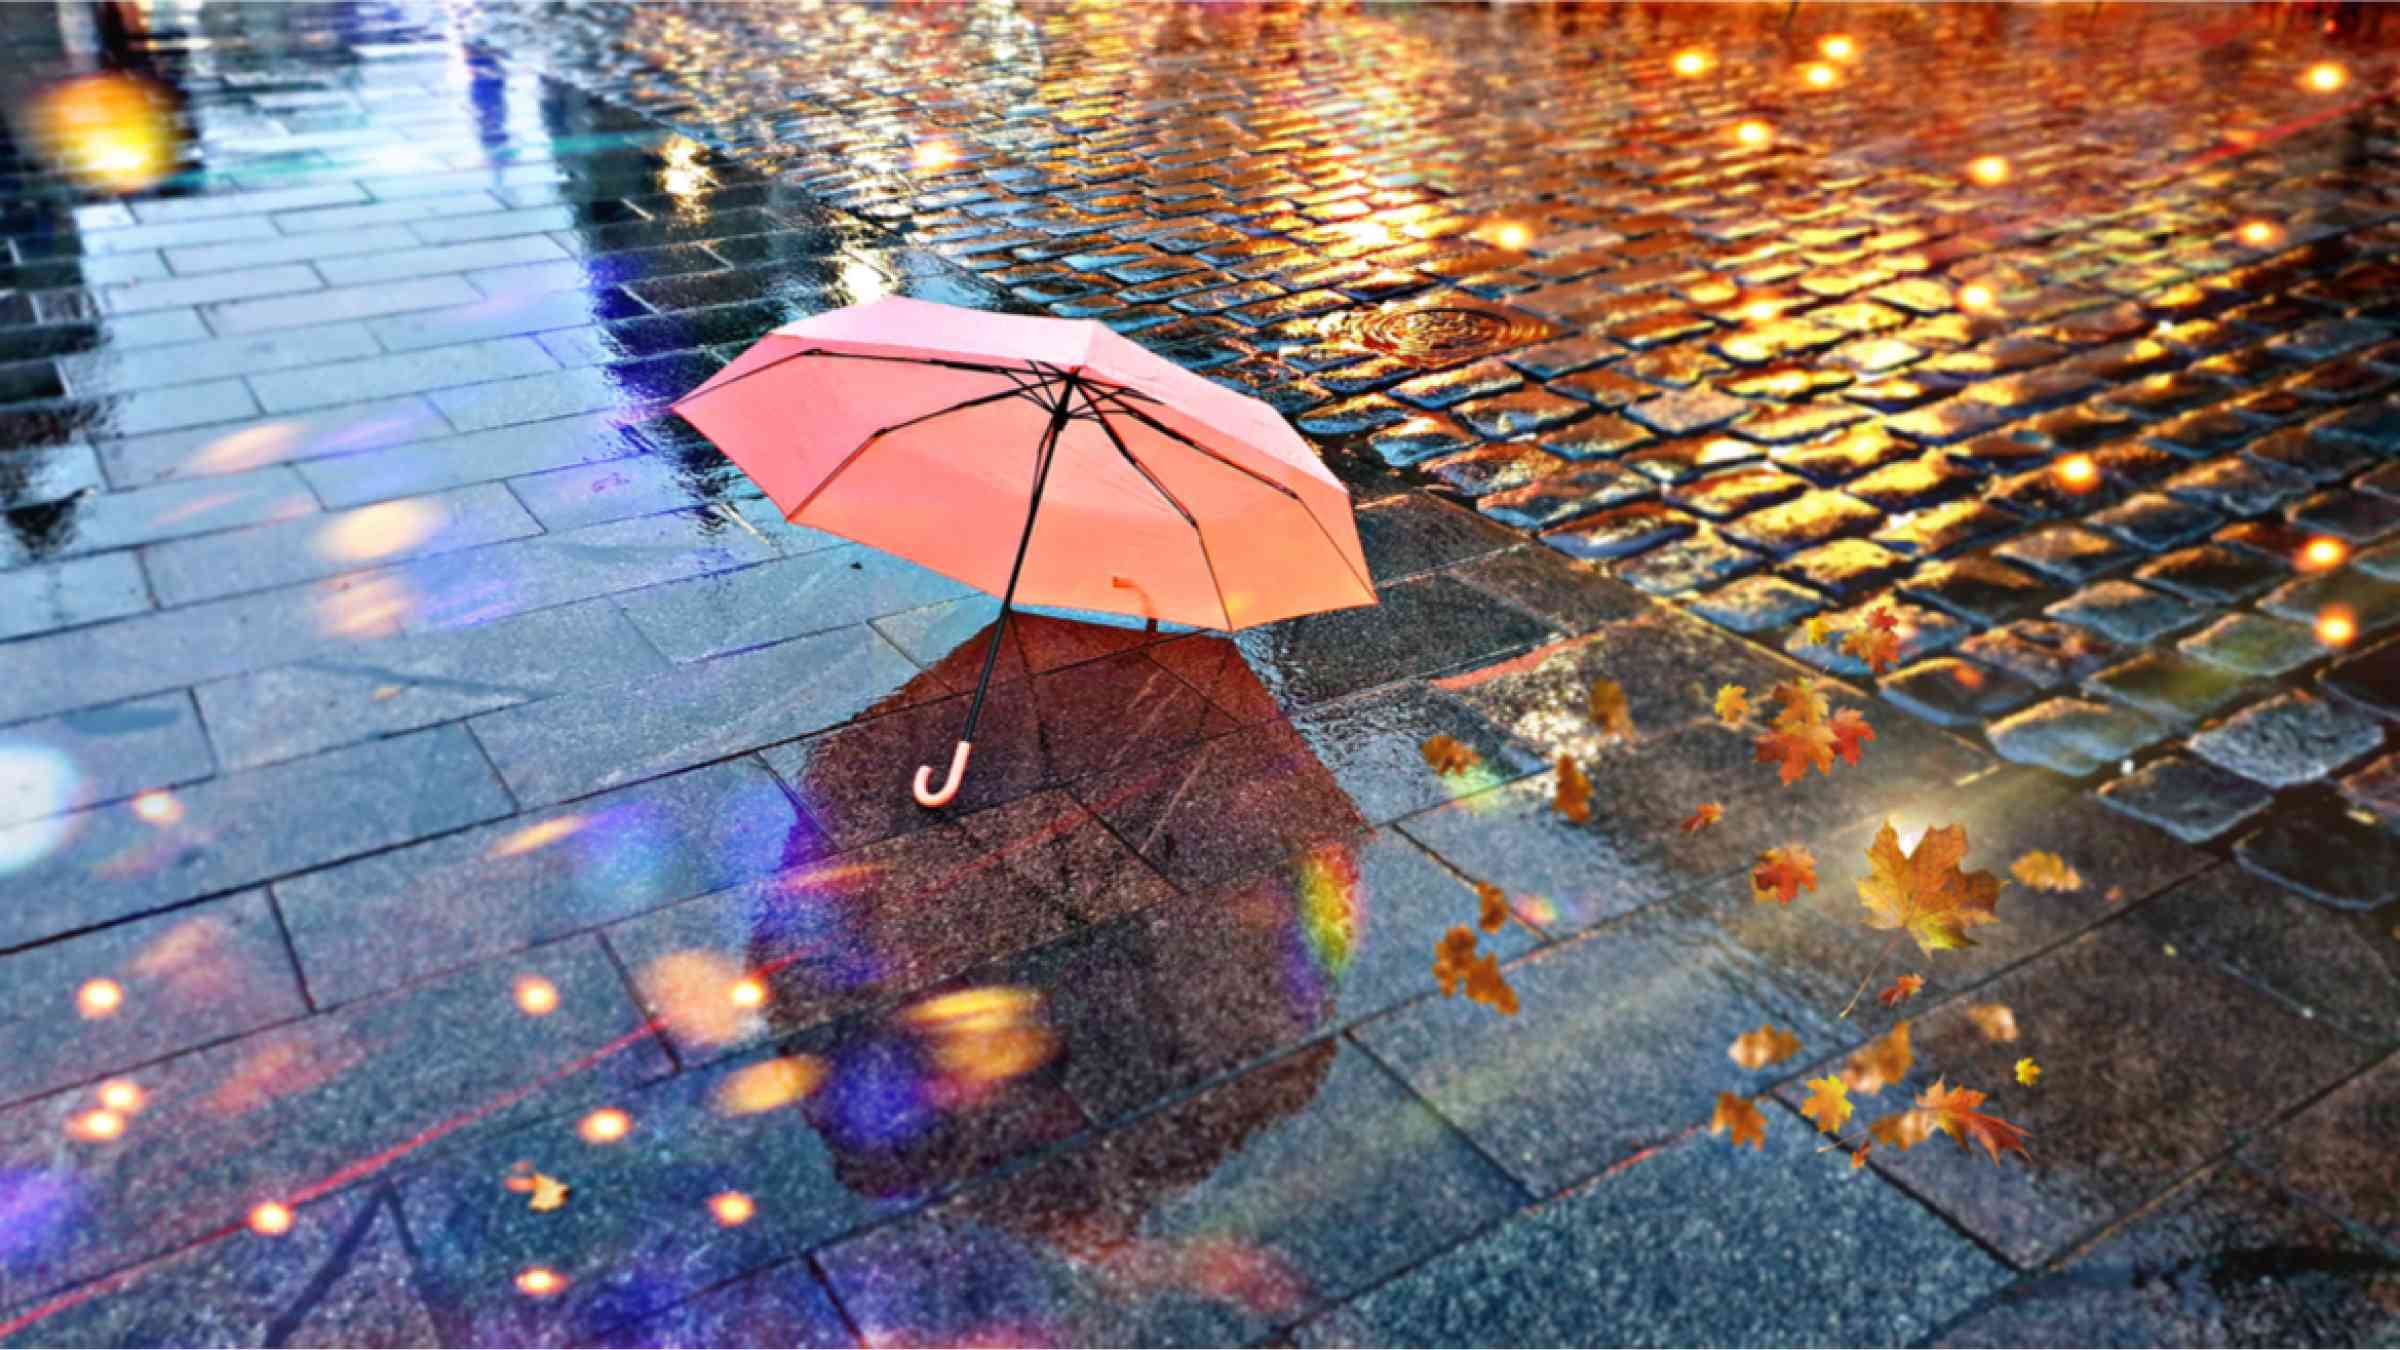 This image shows a pink umbrella laying on a rainy street. Leaves are flying around.